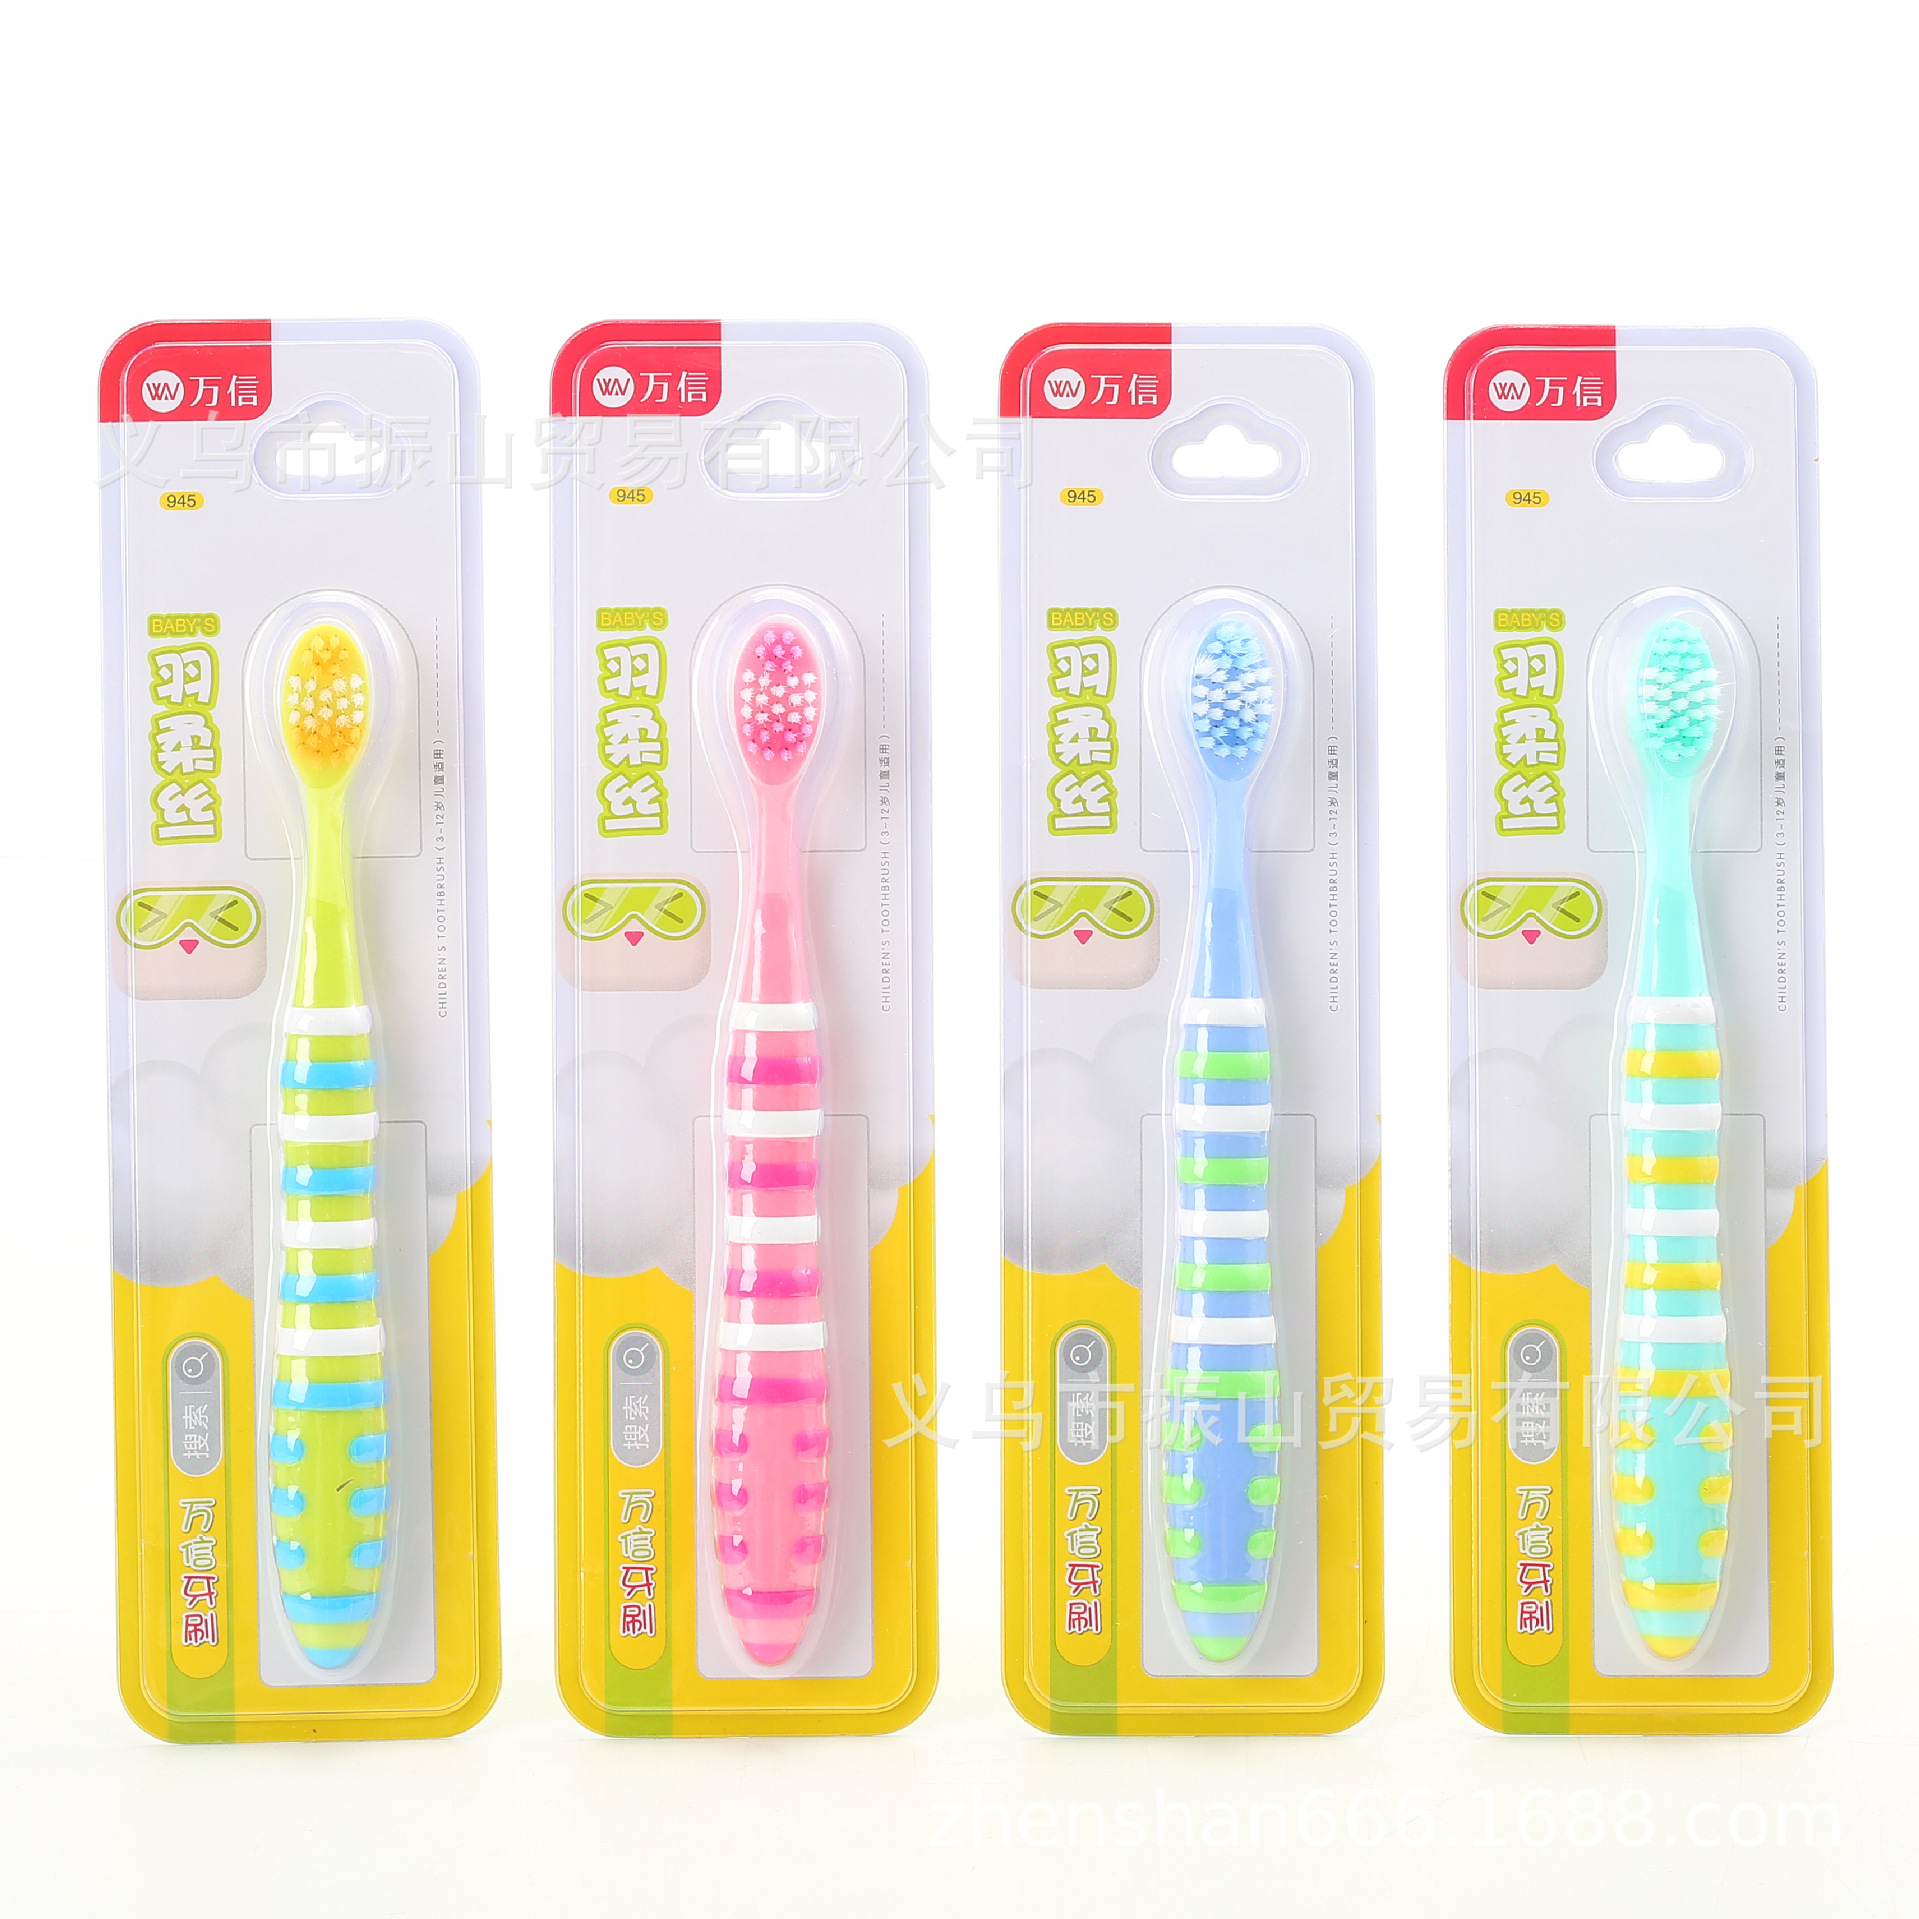 Wanxin 945 Fun Cartoon Non-Slip Toothbrush Handle 3-12 Years Old Applicable Feather Soft Silk Children‘s Toothbrush